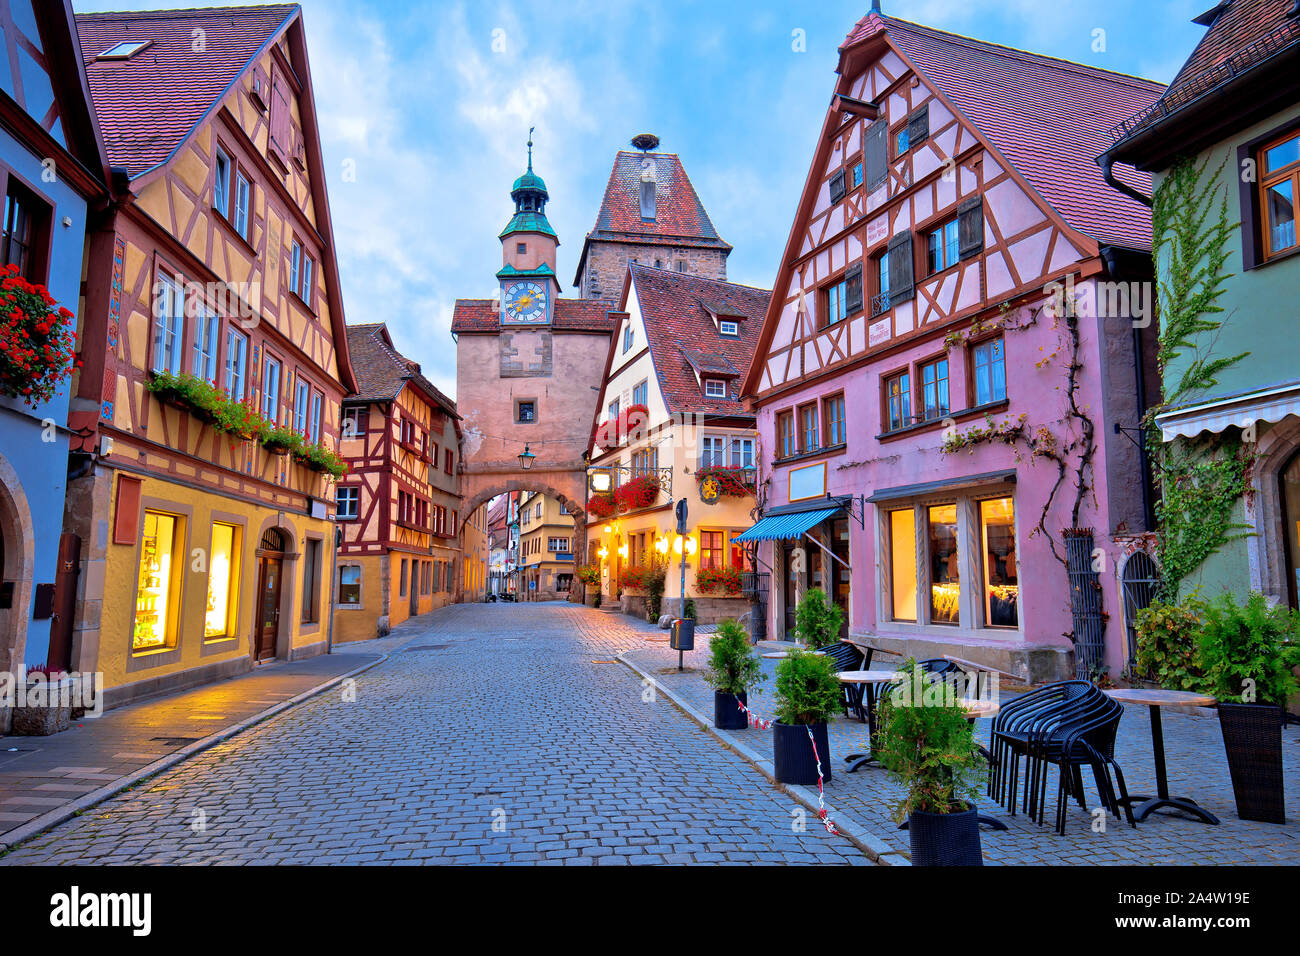 Cobbled street of historic town of Rothenburg ob der Tauber dawn view, Romantic road of Bavaria region of Germany Stock Photo